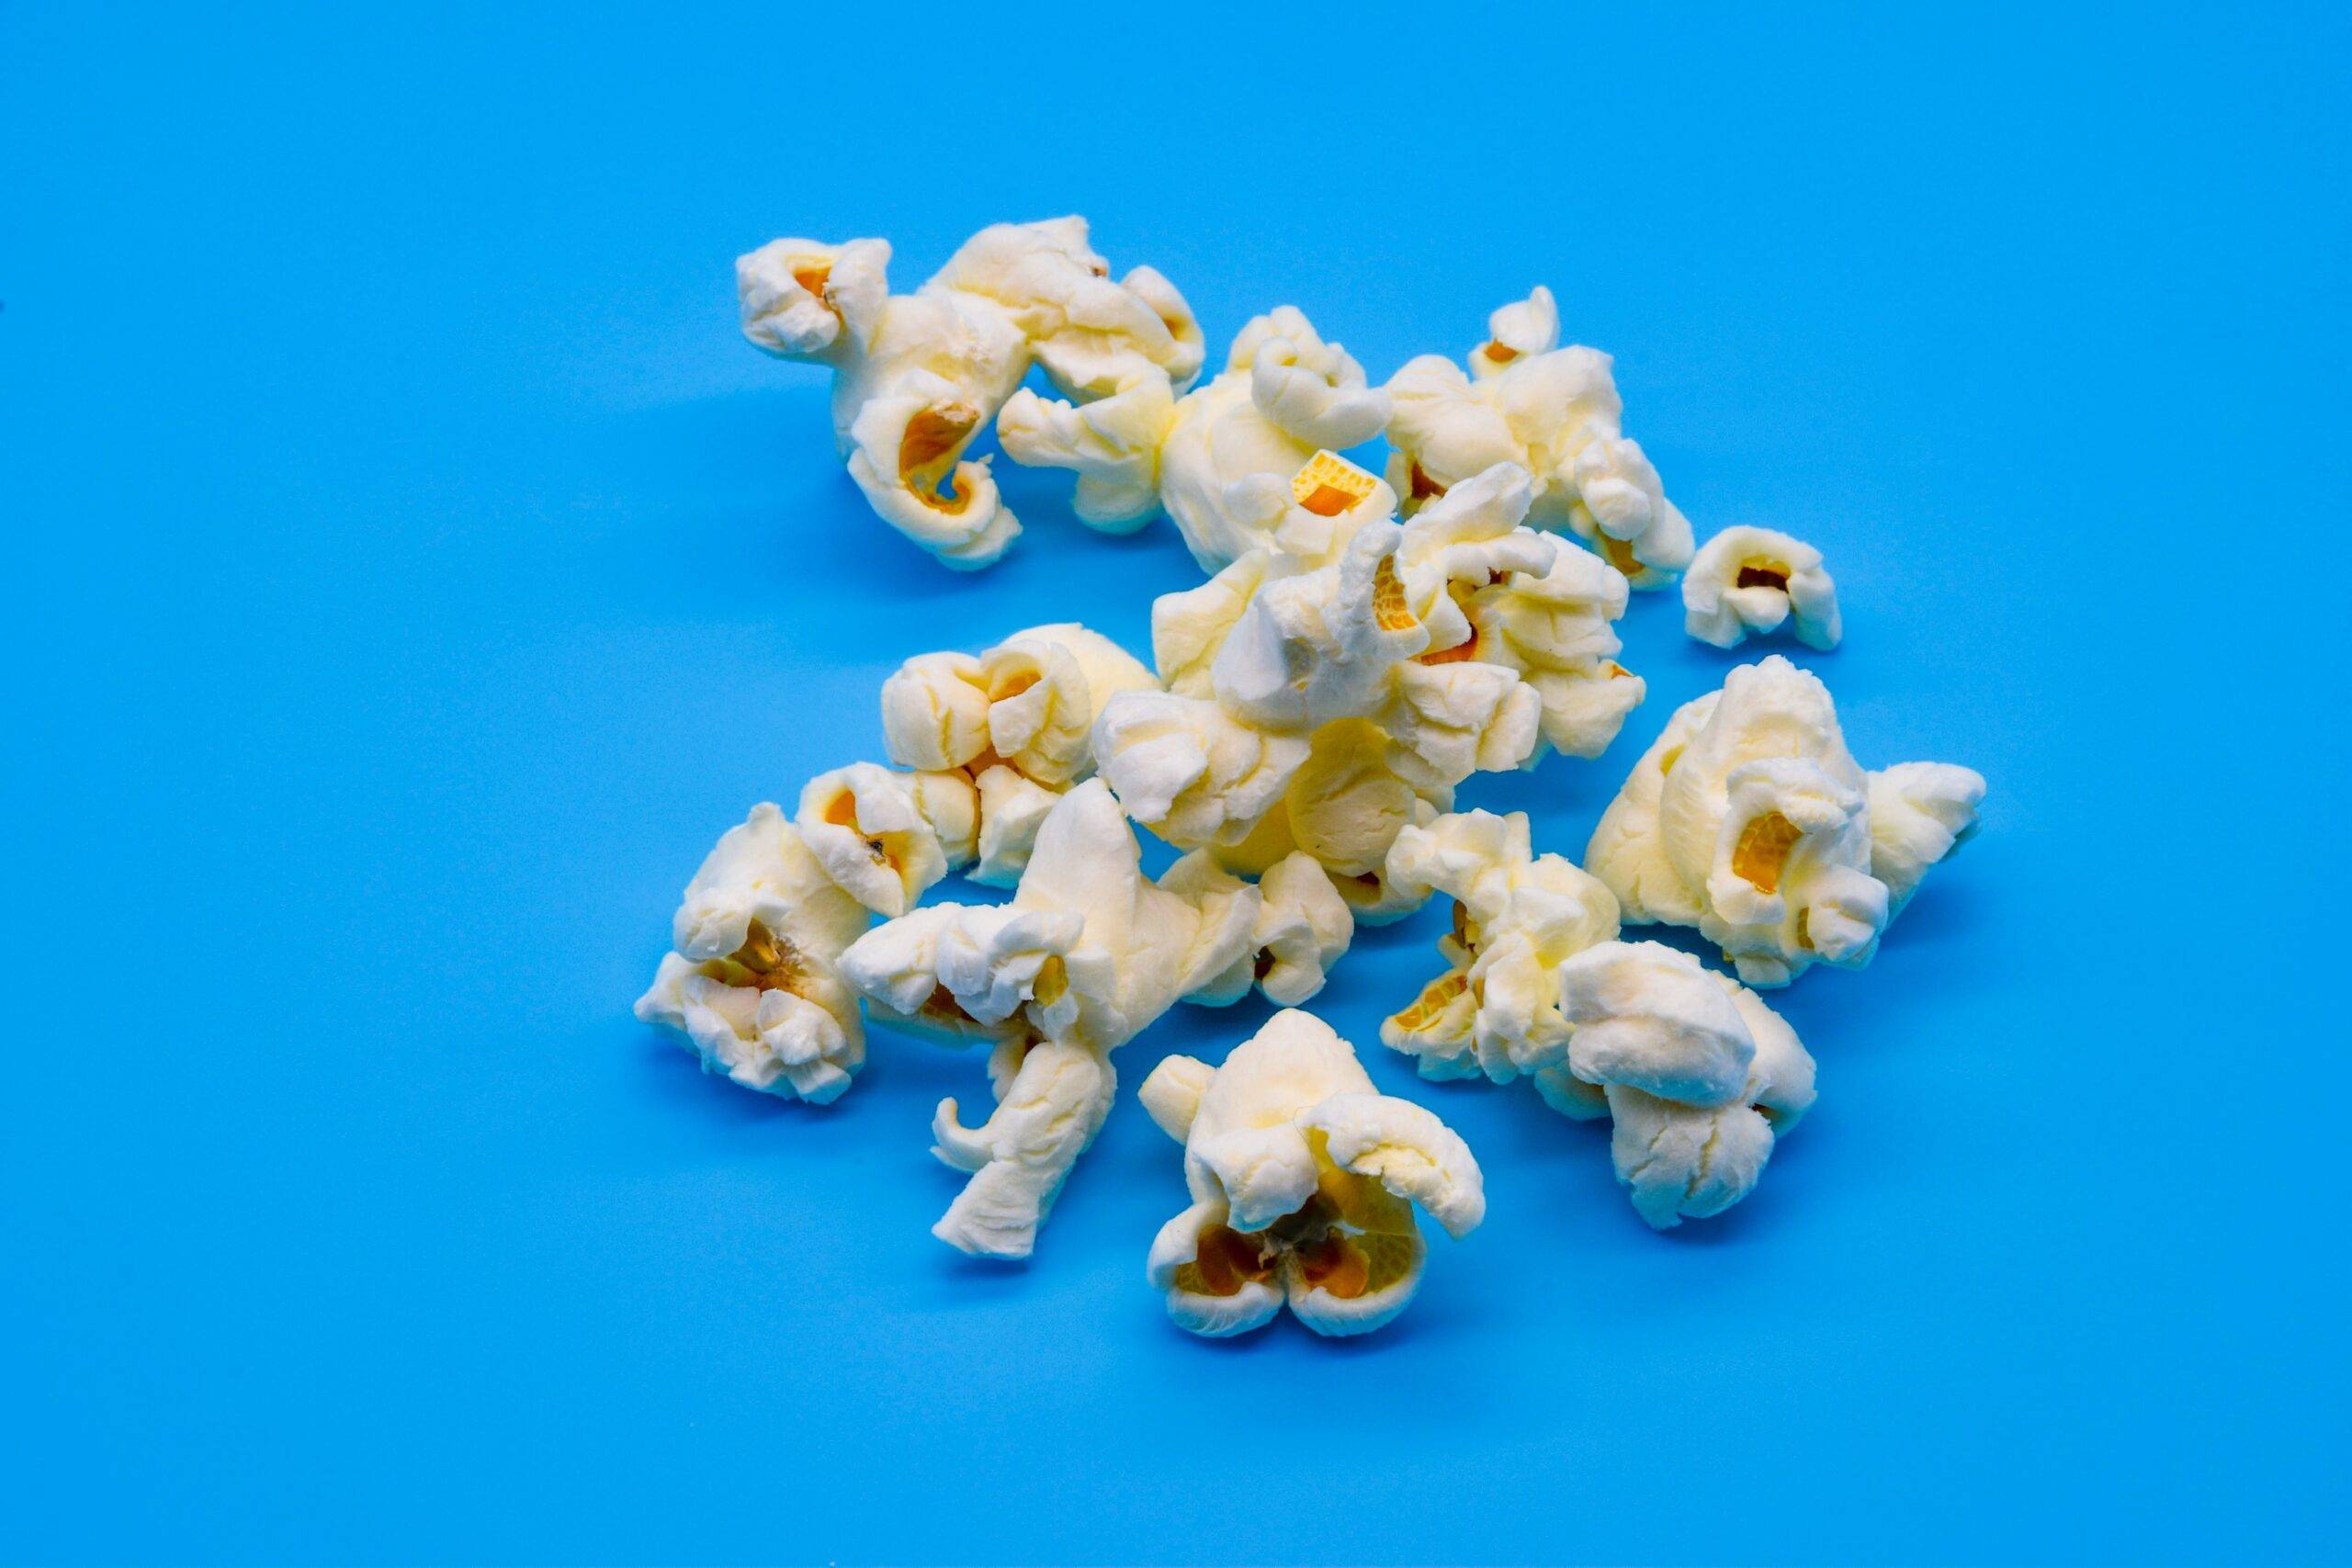 Could popcorn replace traditional home insulation?